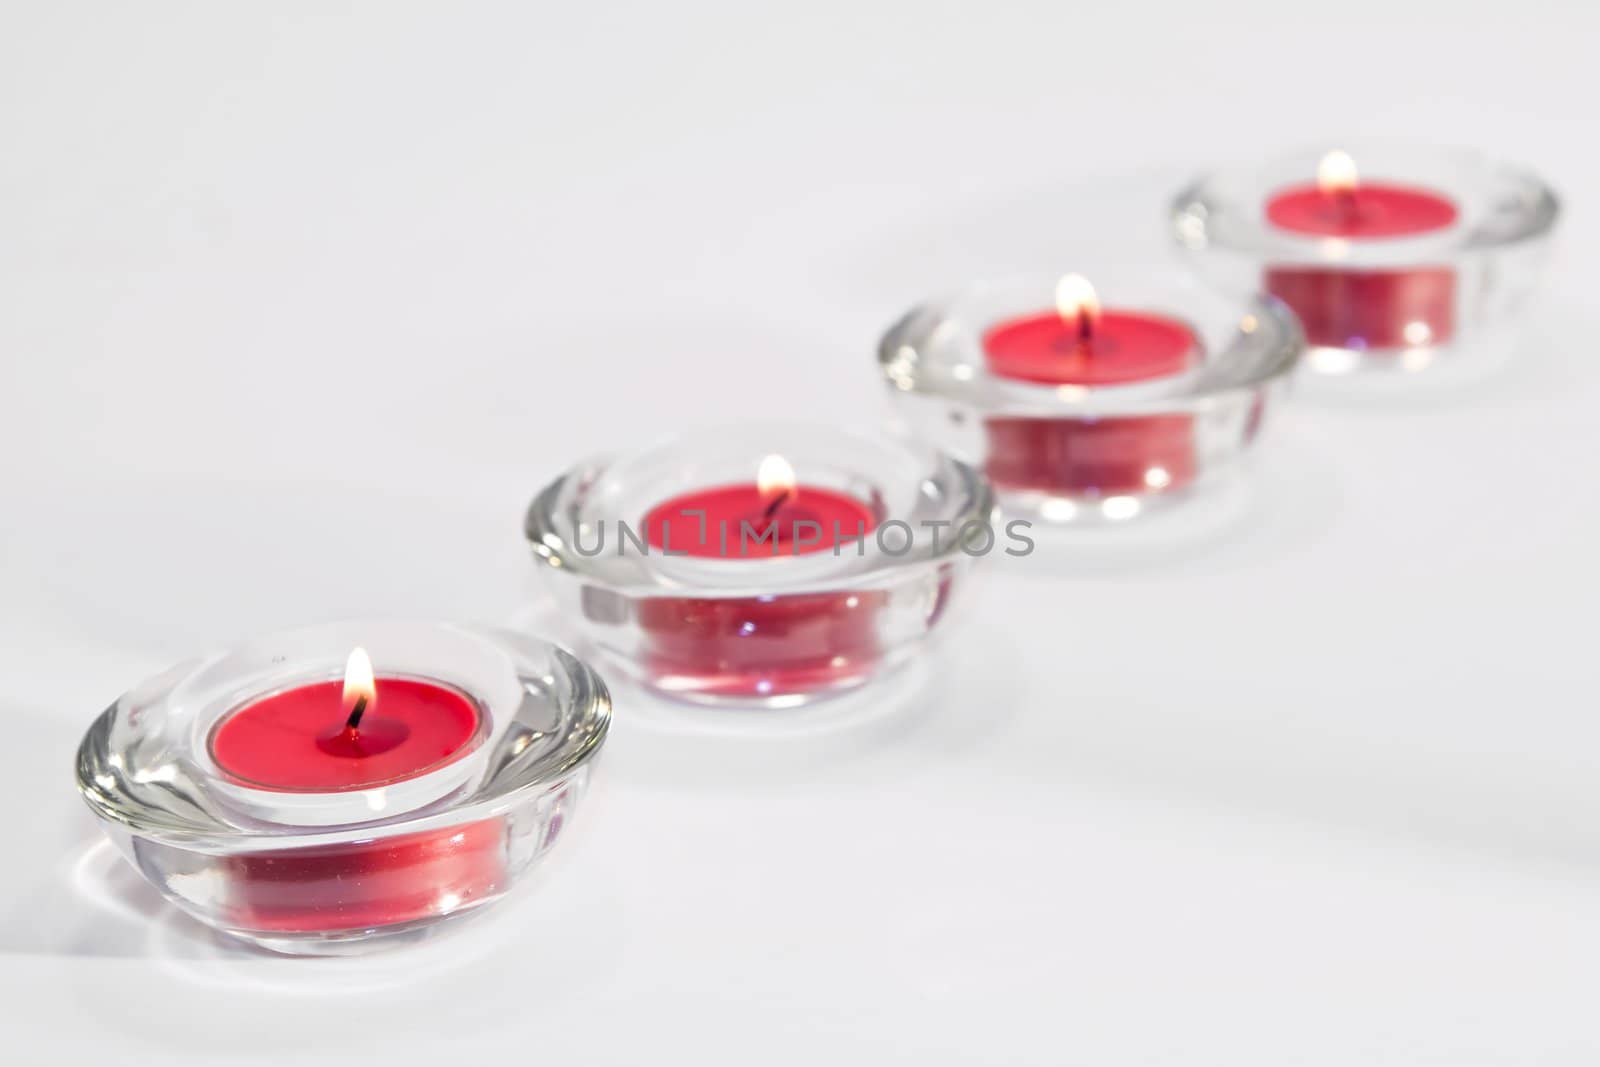 Line of red lit candles on white background